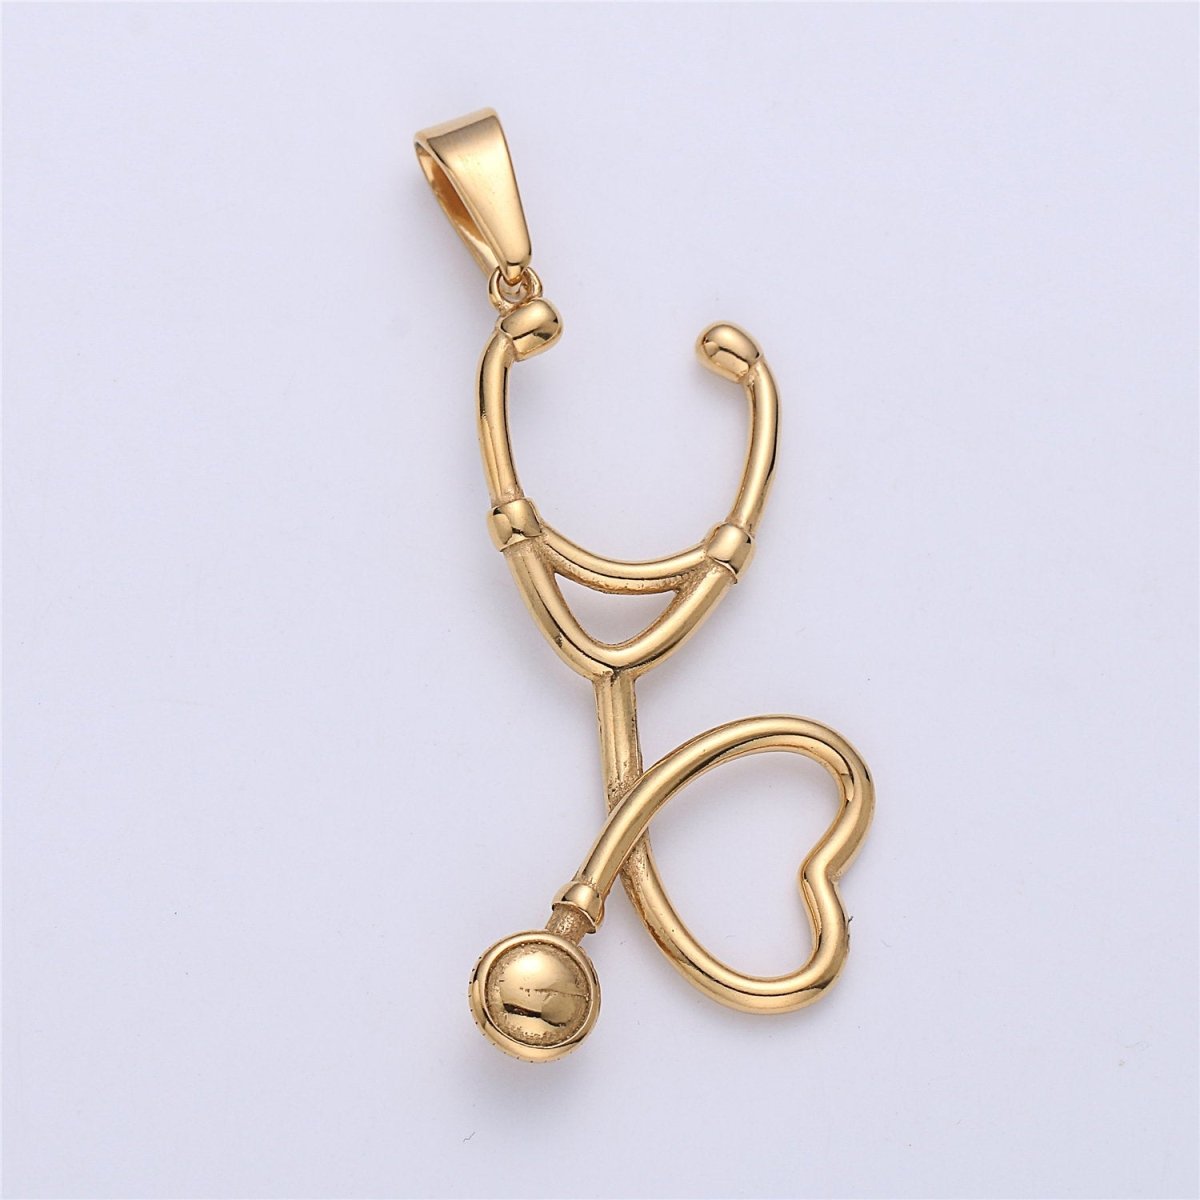 Gold Filled Stethoscope Pendant ,Silver Stethoscope Charm ,Gold Stethoscope for Doctor Nurse,Medical StudentPhysician Gift Jewelry J-671 - DLUXCA